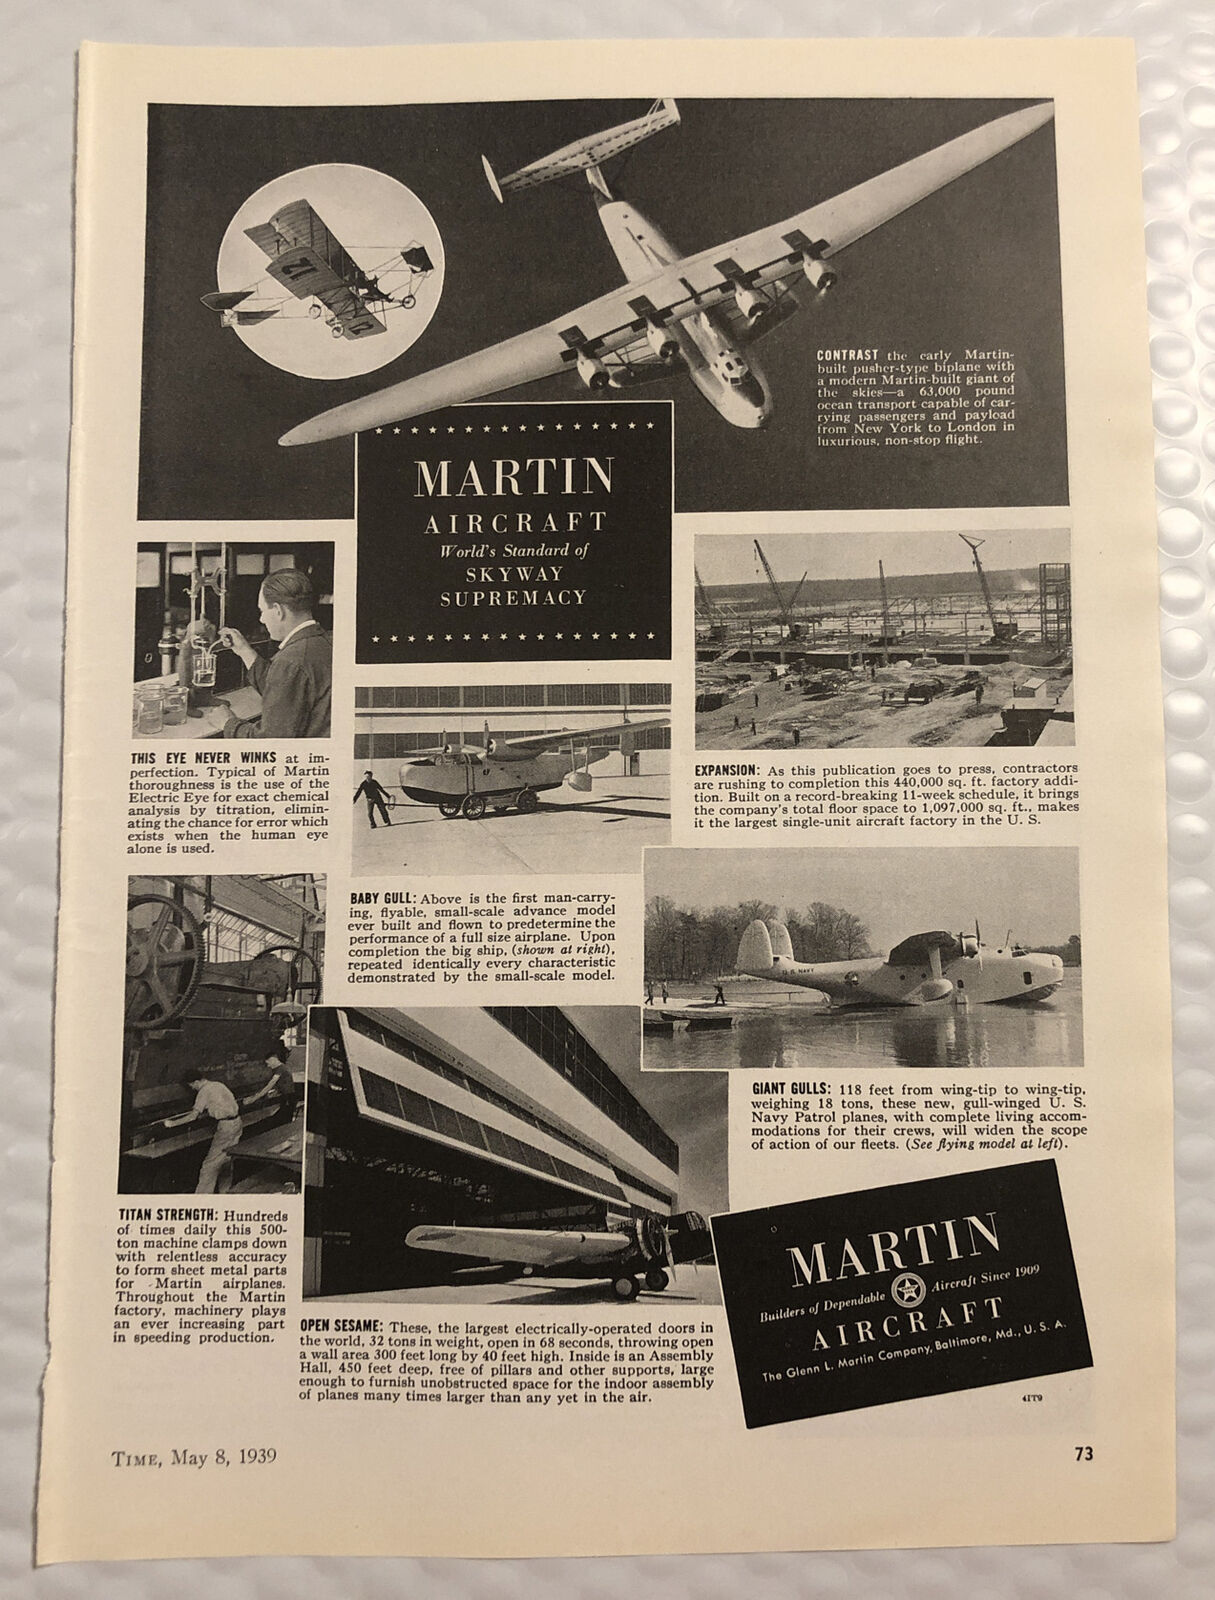 Vintage 1939 Martin Aircraft Print Ad - Full Page - Standard Of Skyway Supremacy